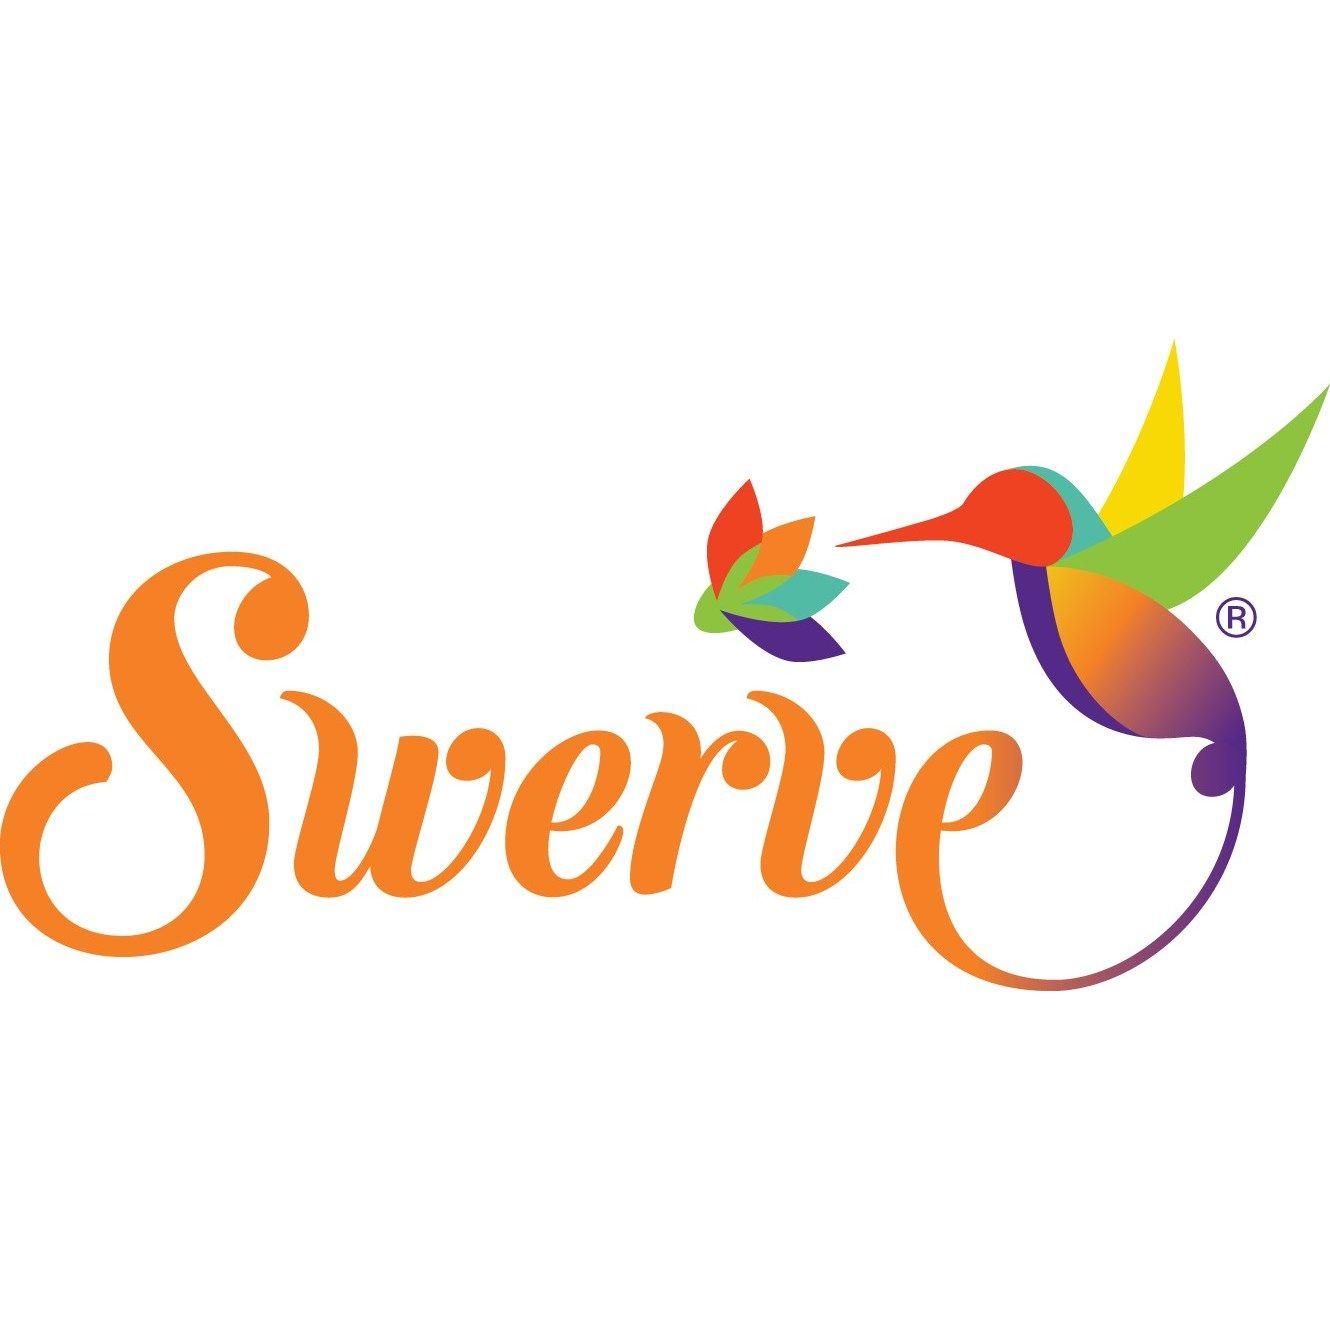 Swerve Logo - Swerve Declares the Golden Cake as the Official Dessert of the ...